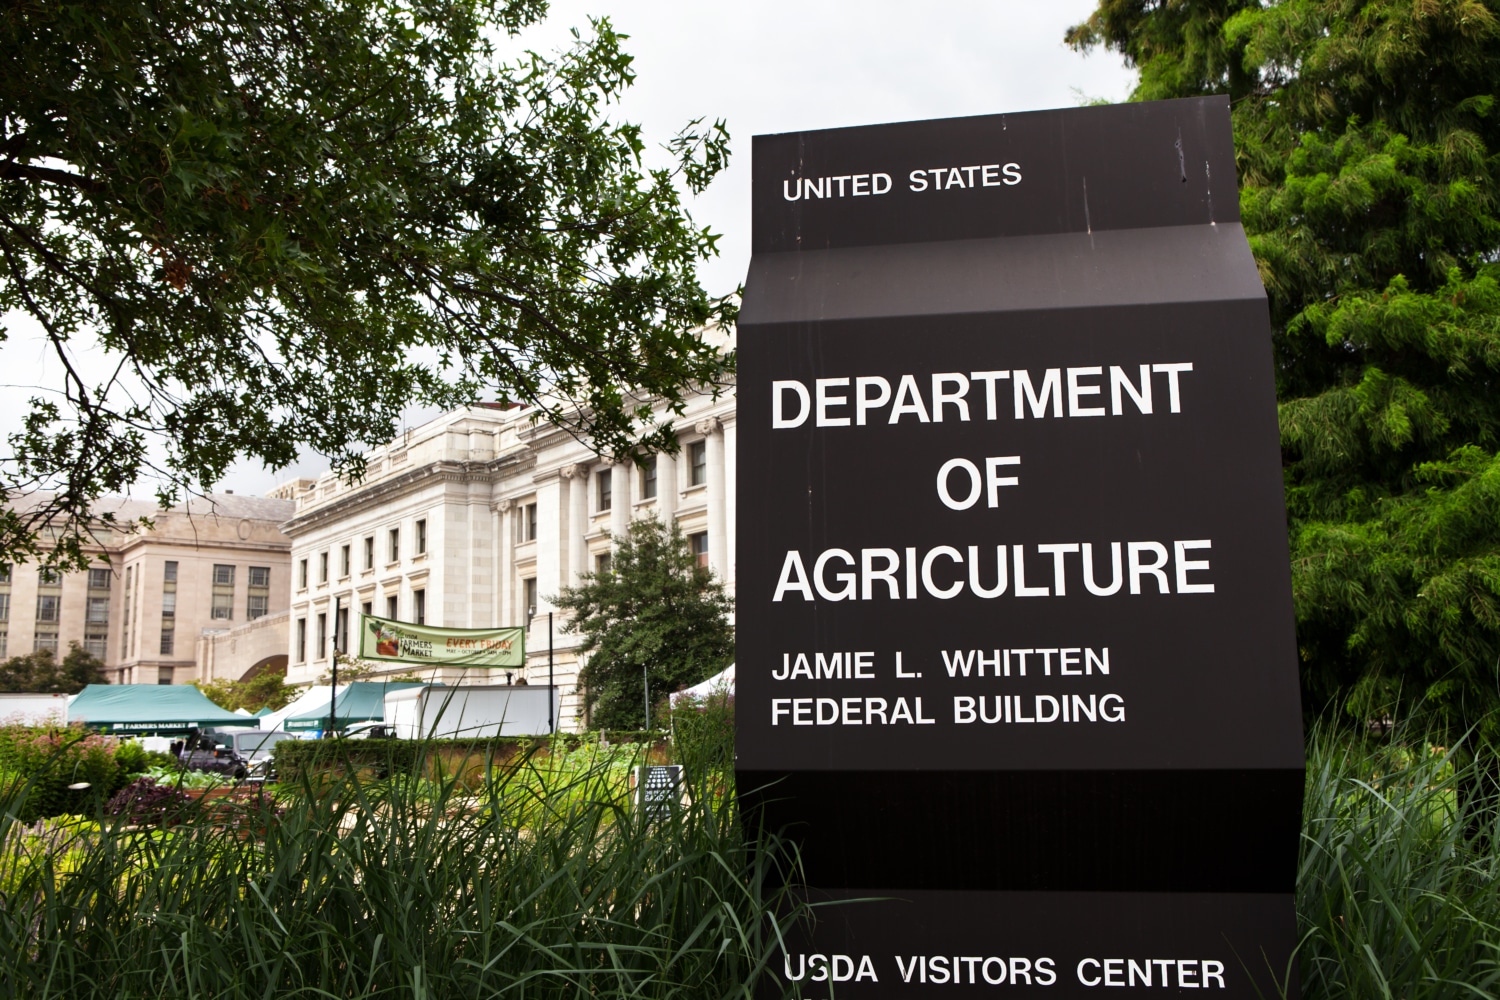 Exterior image of US Dept of Agriculture with sign.